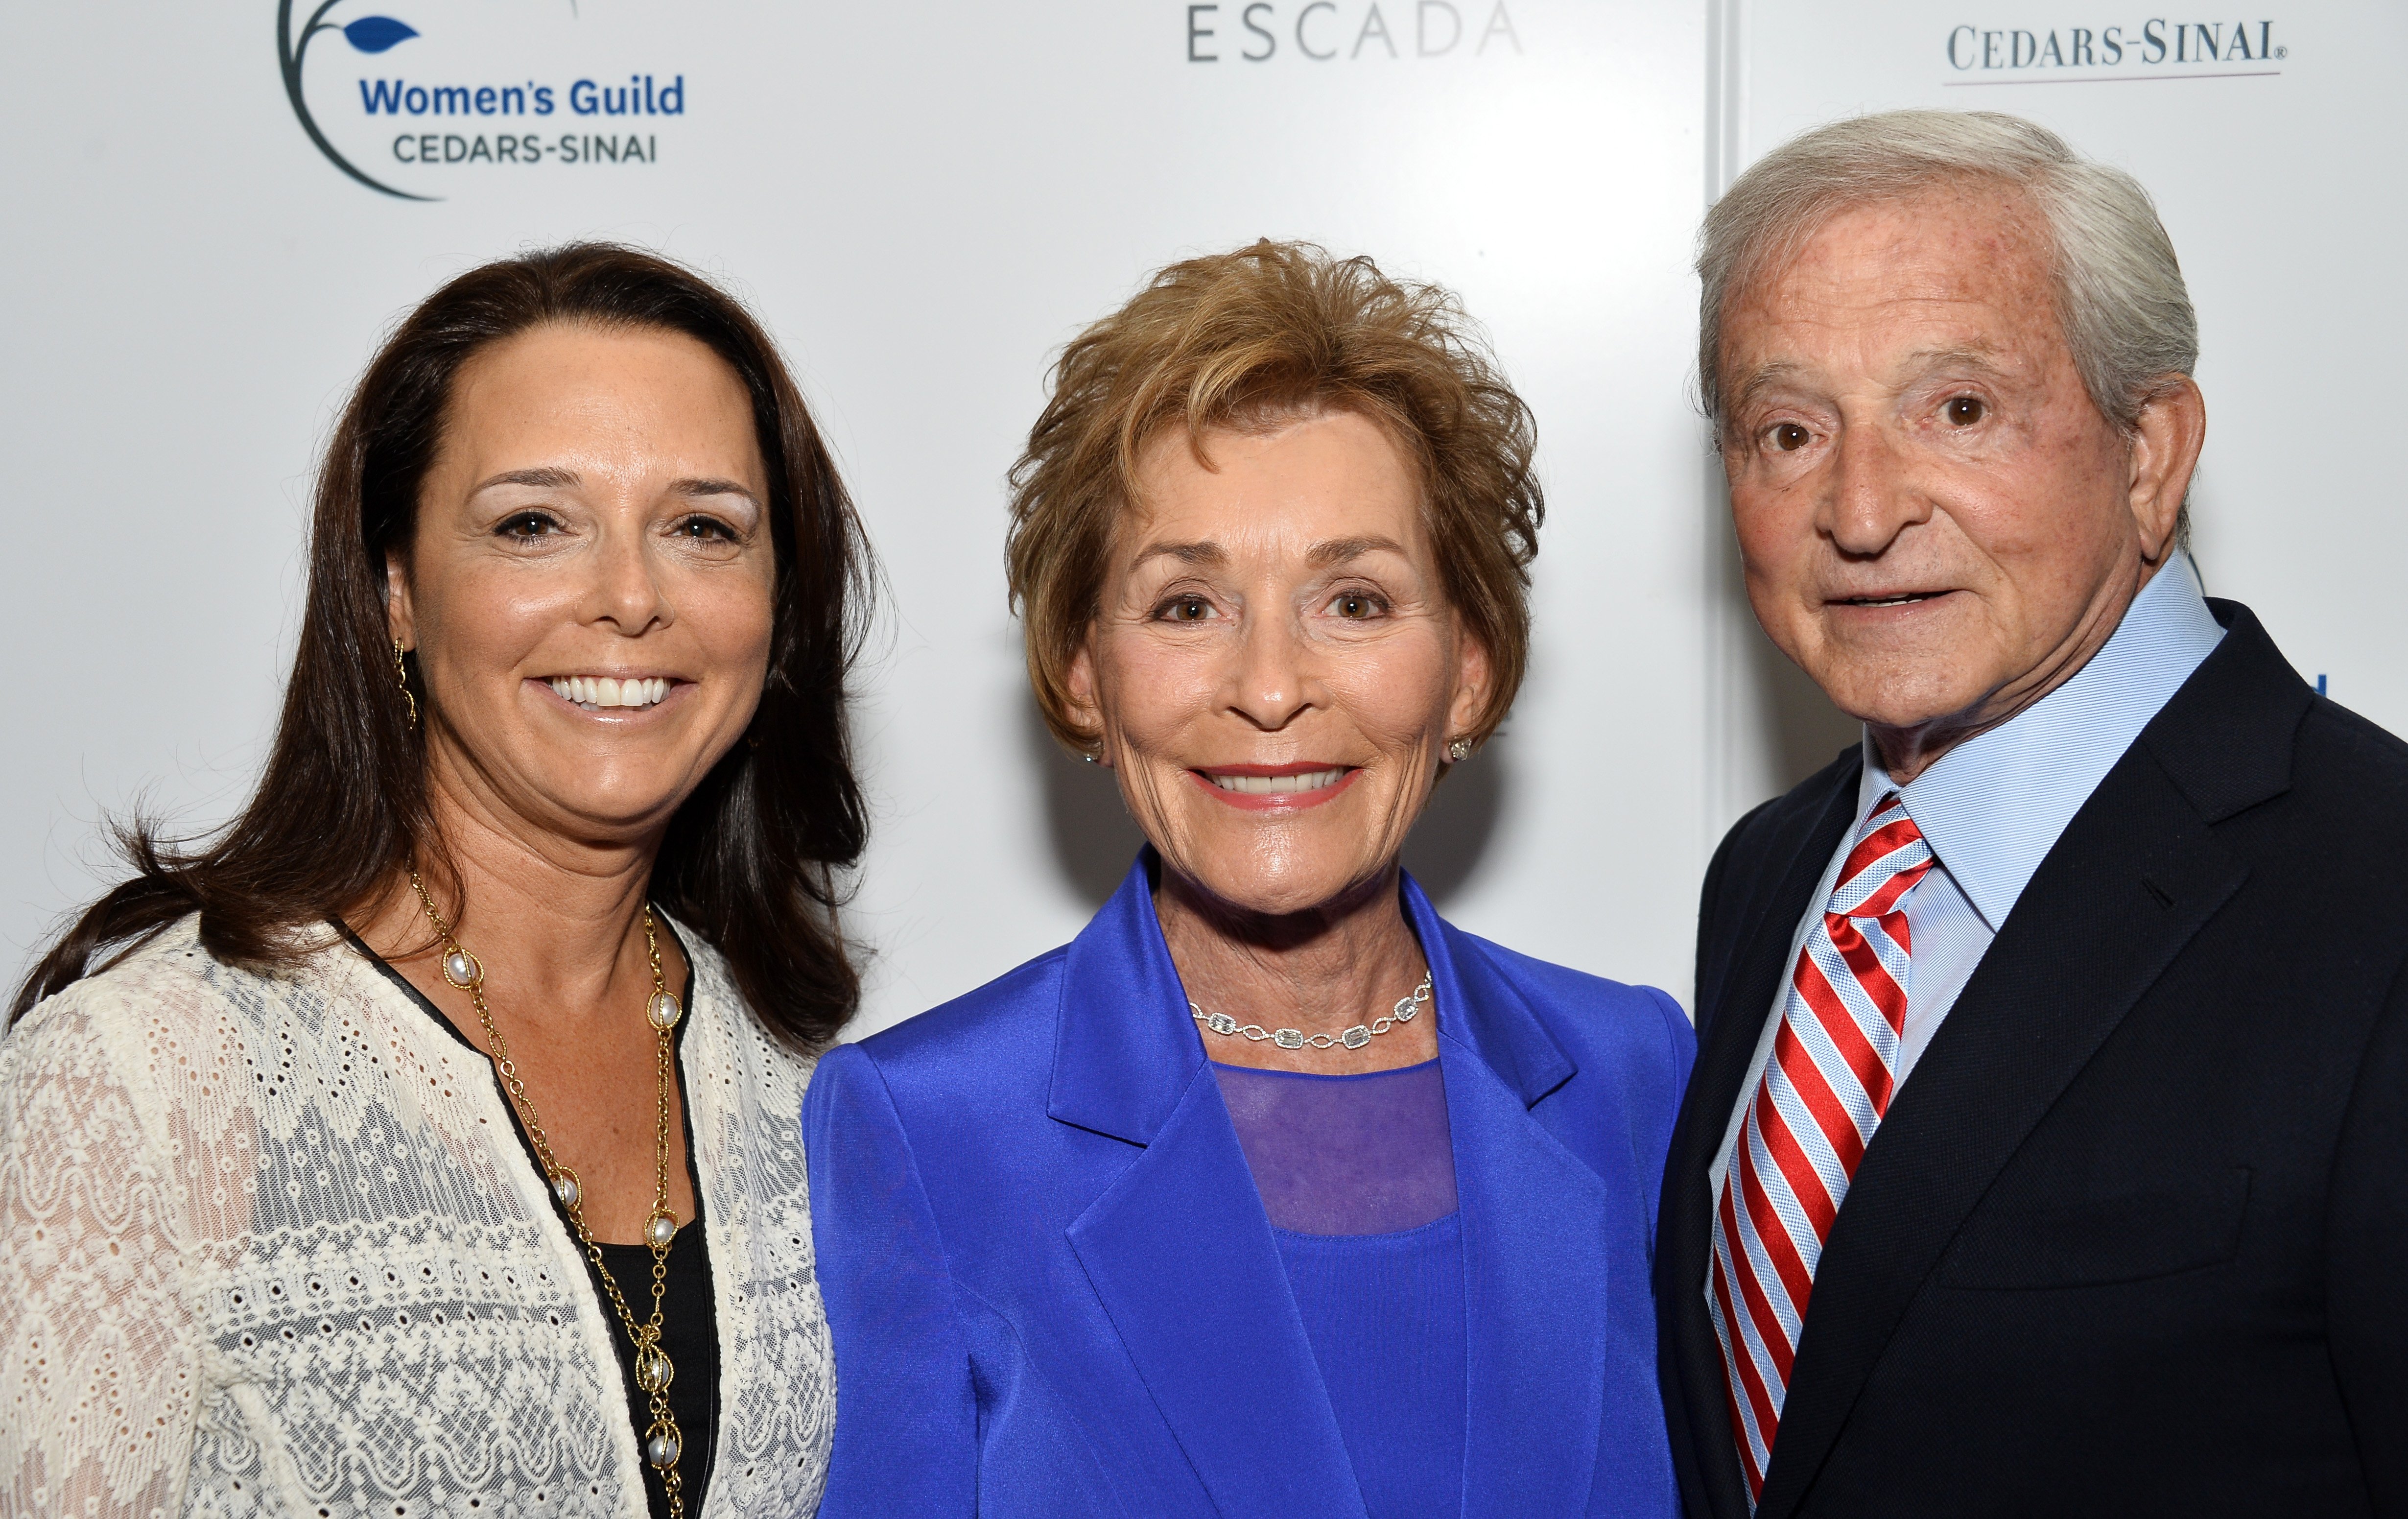 The Honorable Judy Sheindlin, her husband Jerry Sheindlin, and their daughter Nicole Sheindlin on April 13, 2015 in Beverly Hills, California. | Source: Getty Images